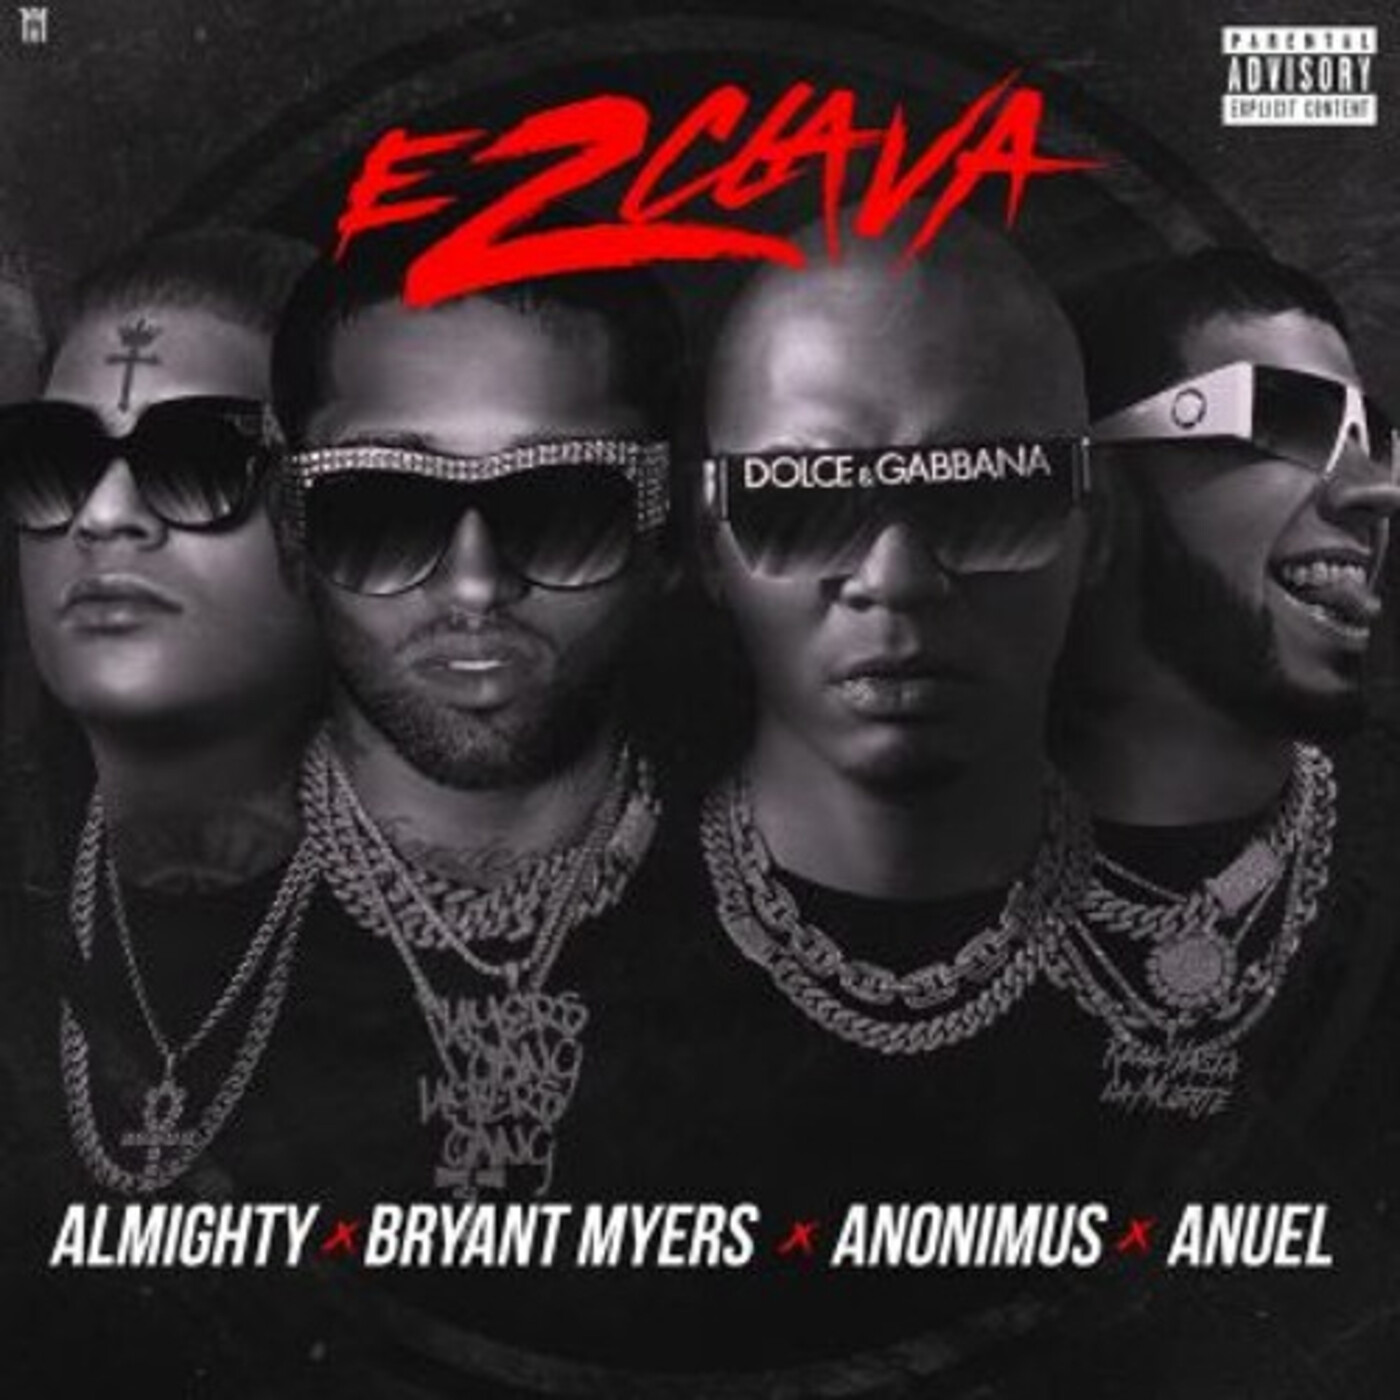 Esclava - Myers, Anuel Almighty, Podcast en iVoox